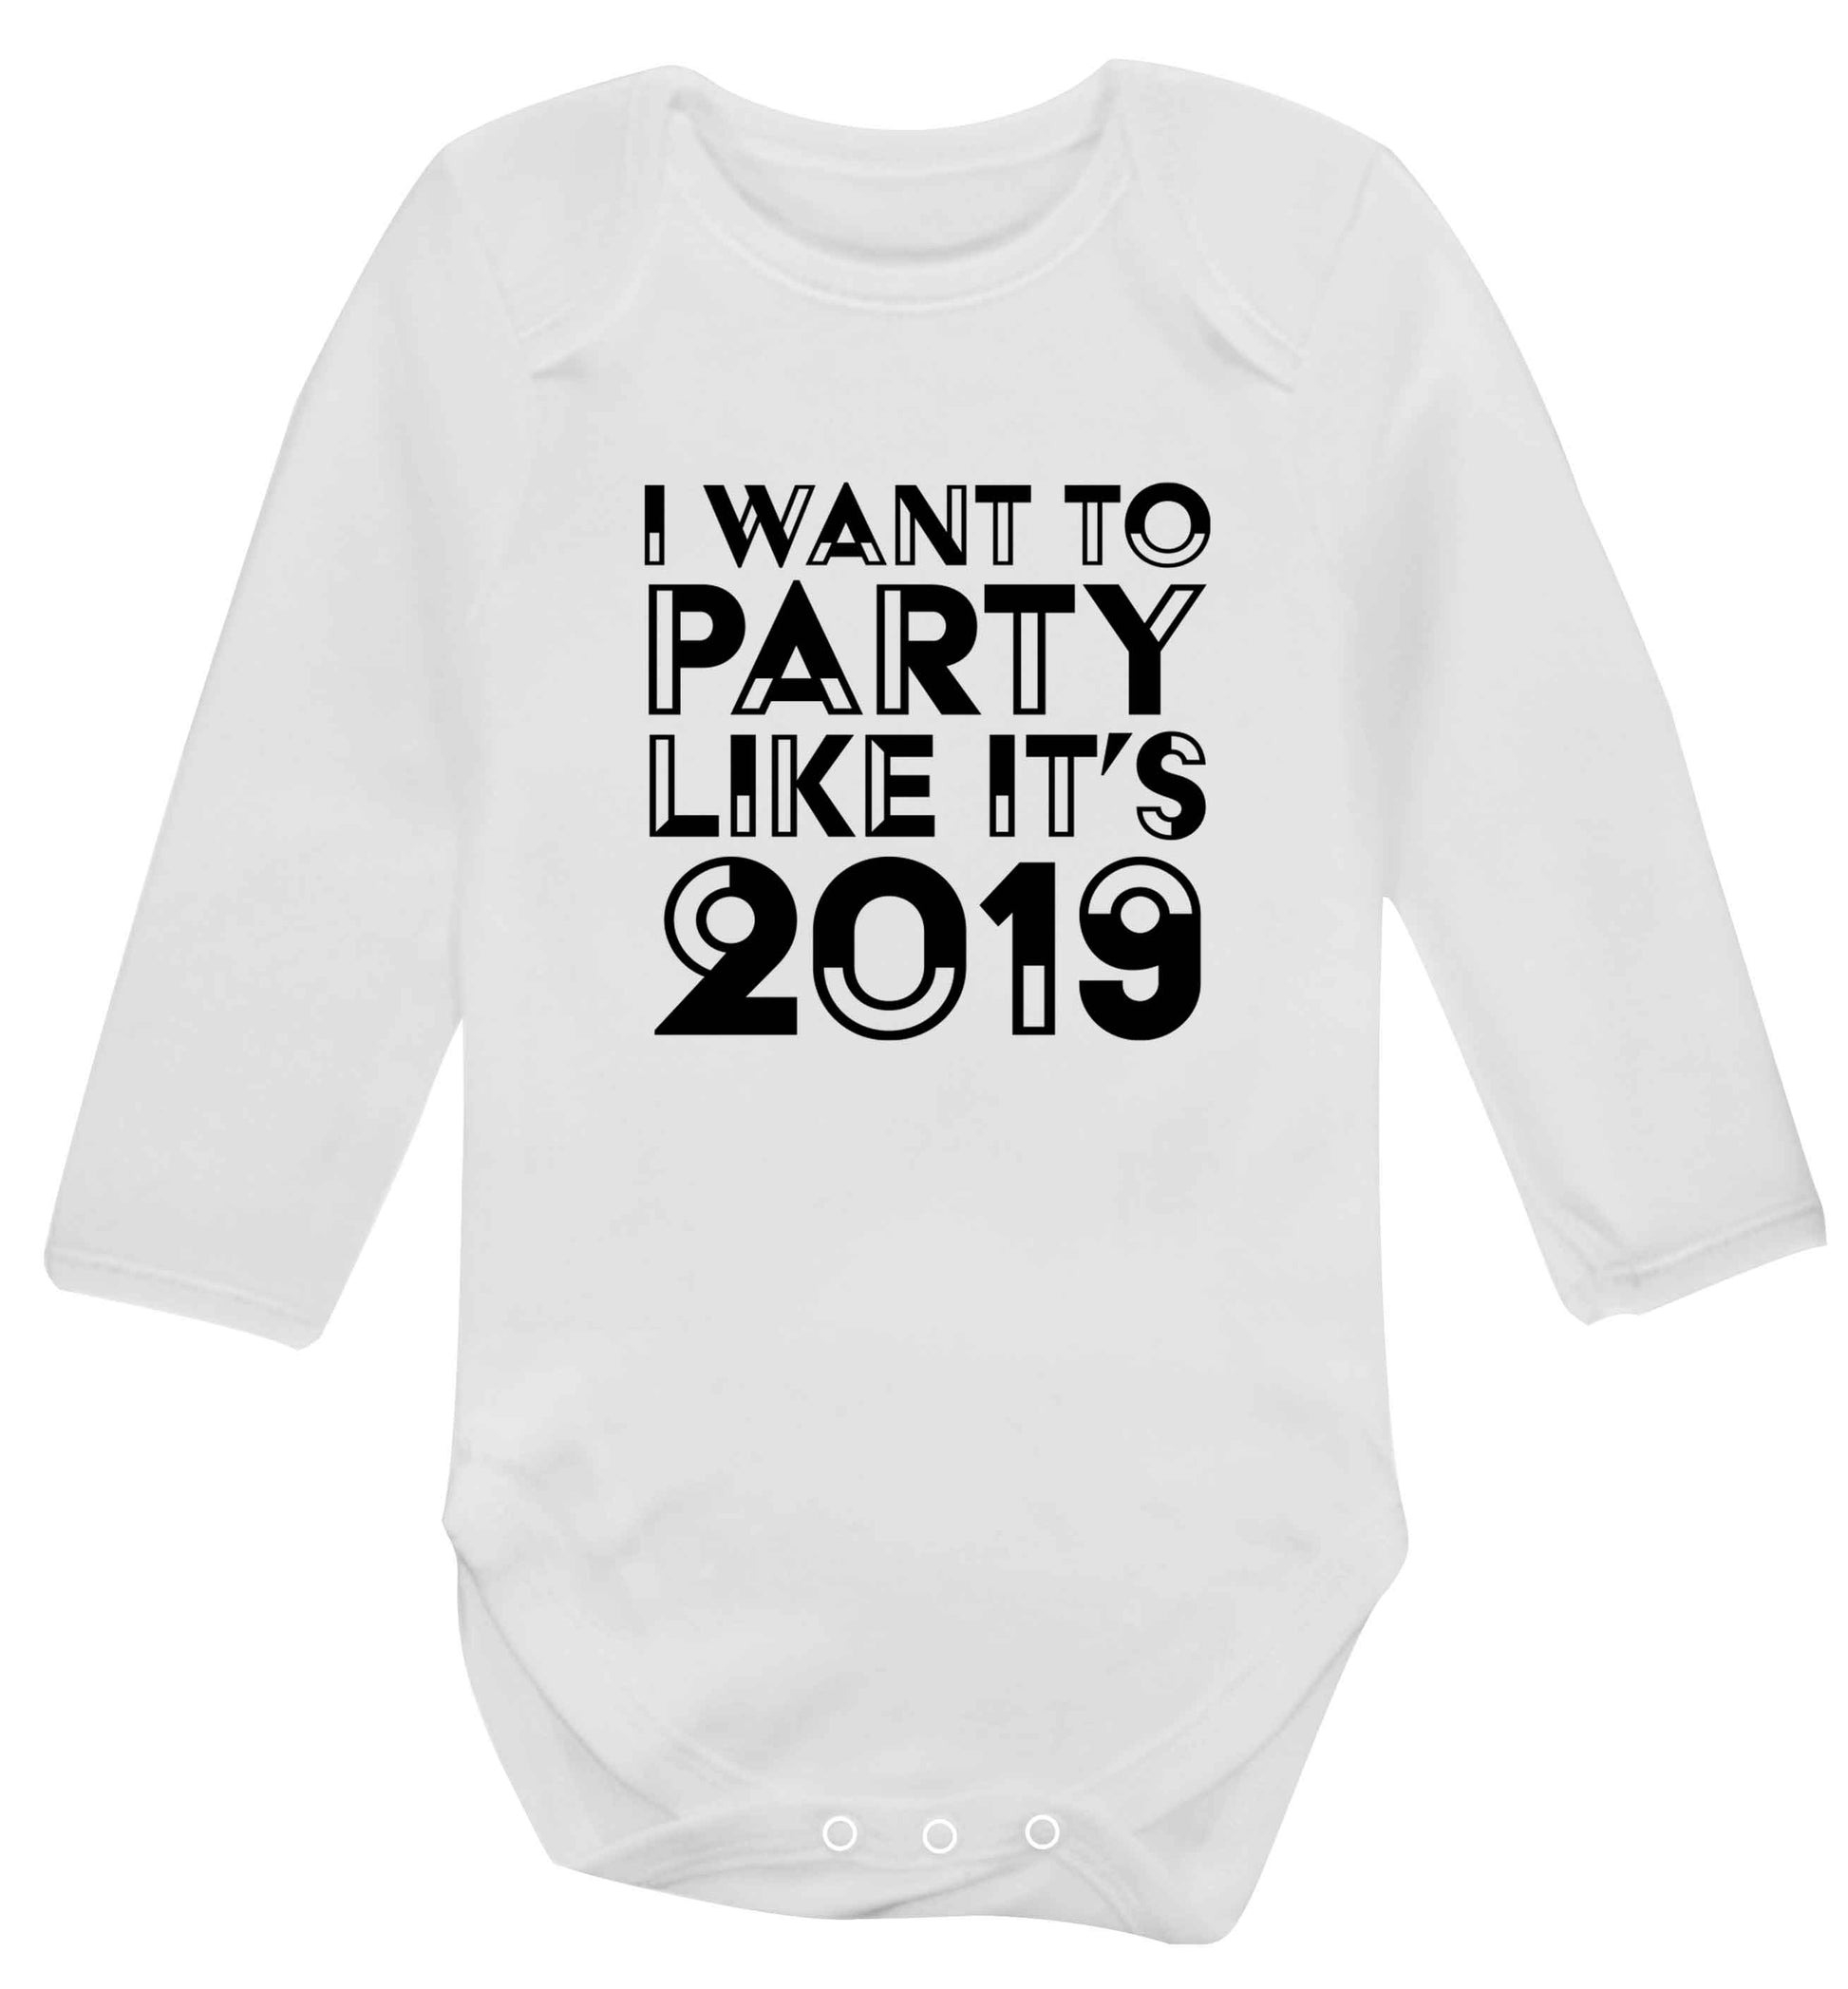 I want to party like it's 2019 baby vest long sleeved white 6-12 months